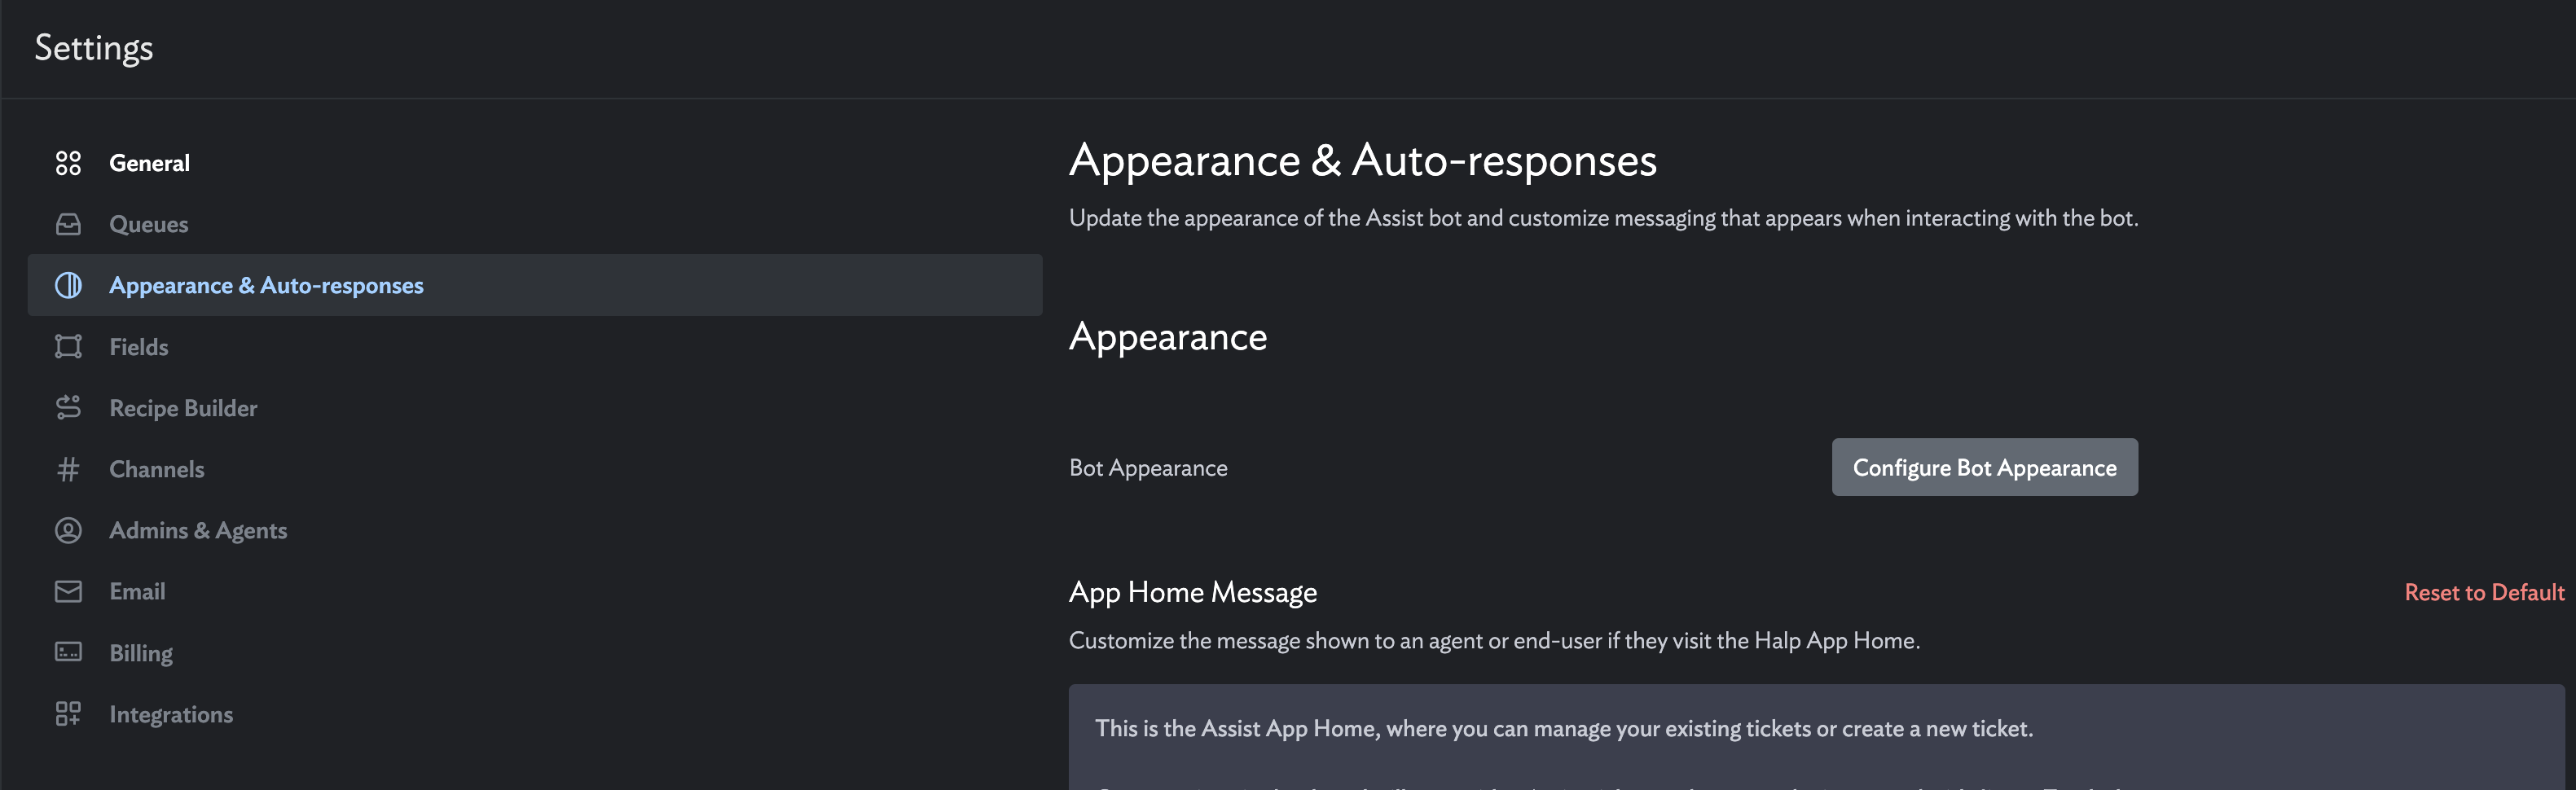 Appearances and auto-response settings